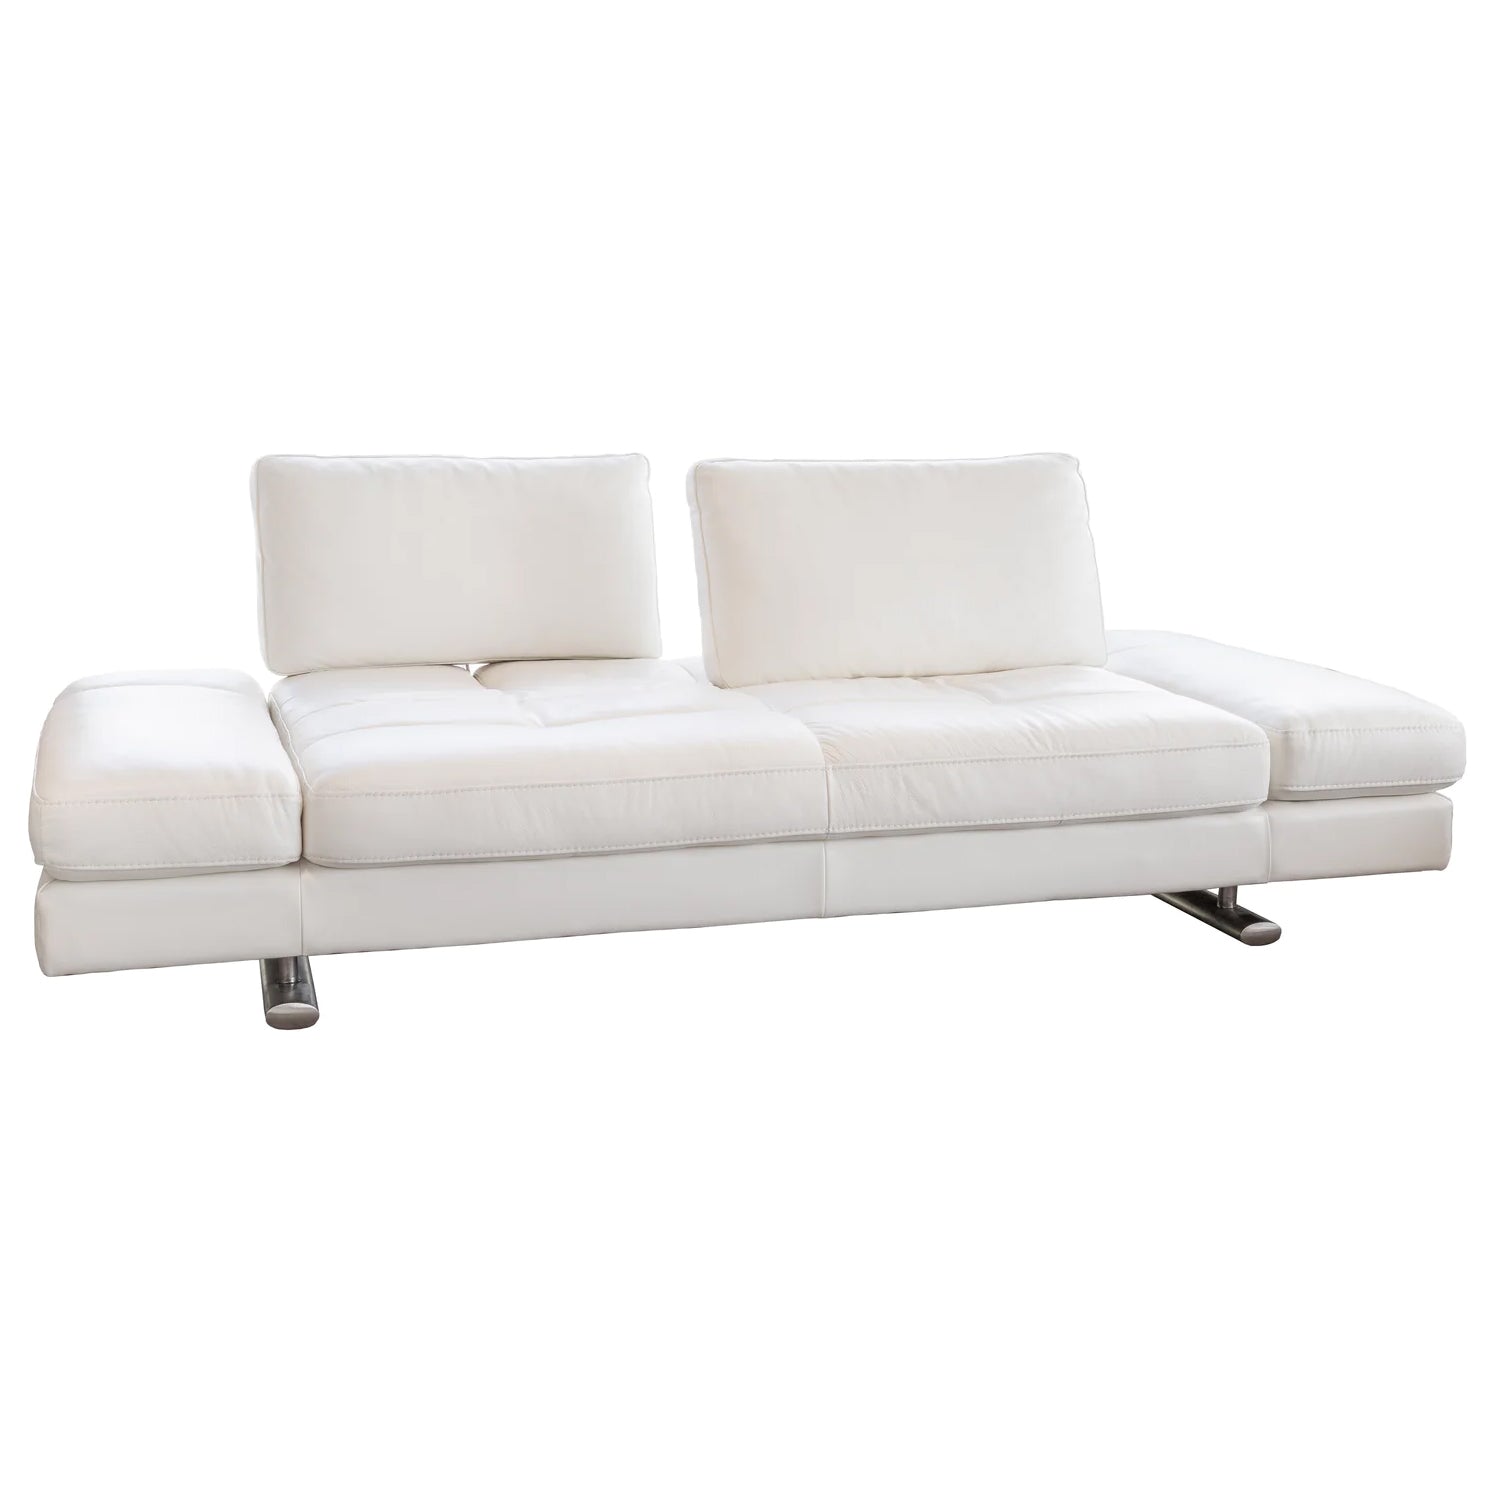 1372 Movable Back Sofa - White Leather